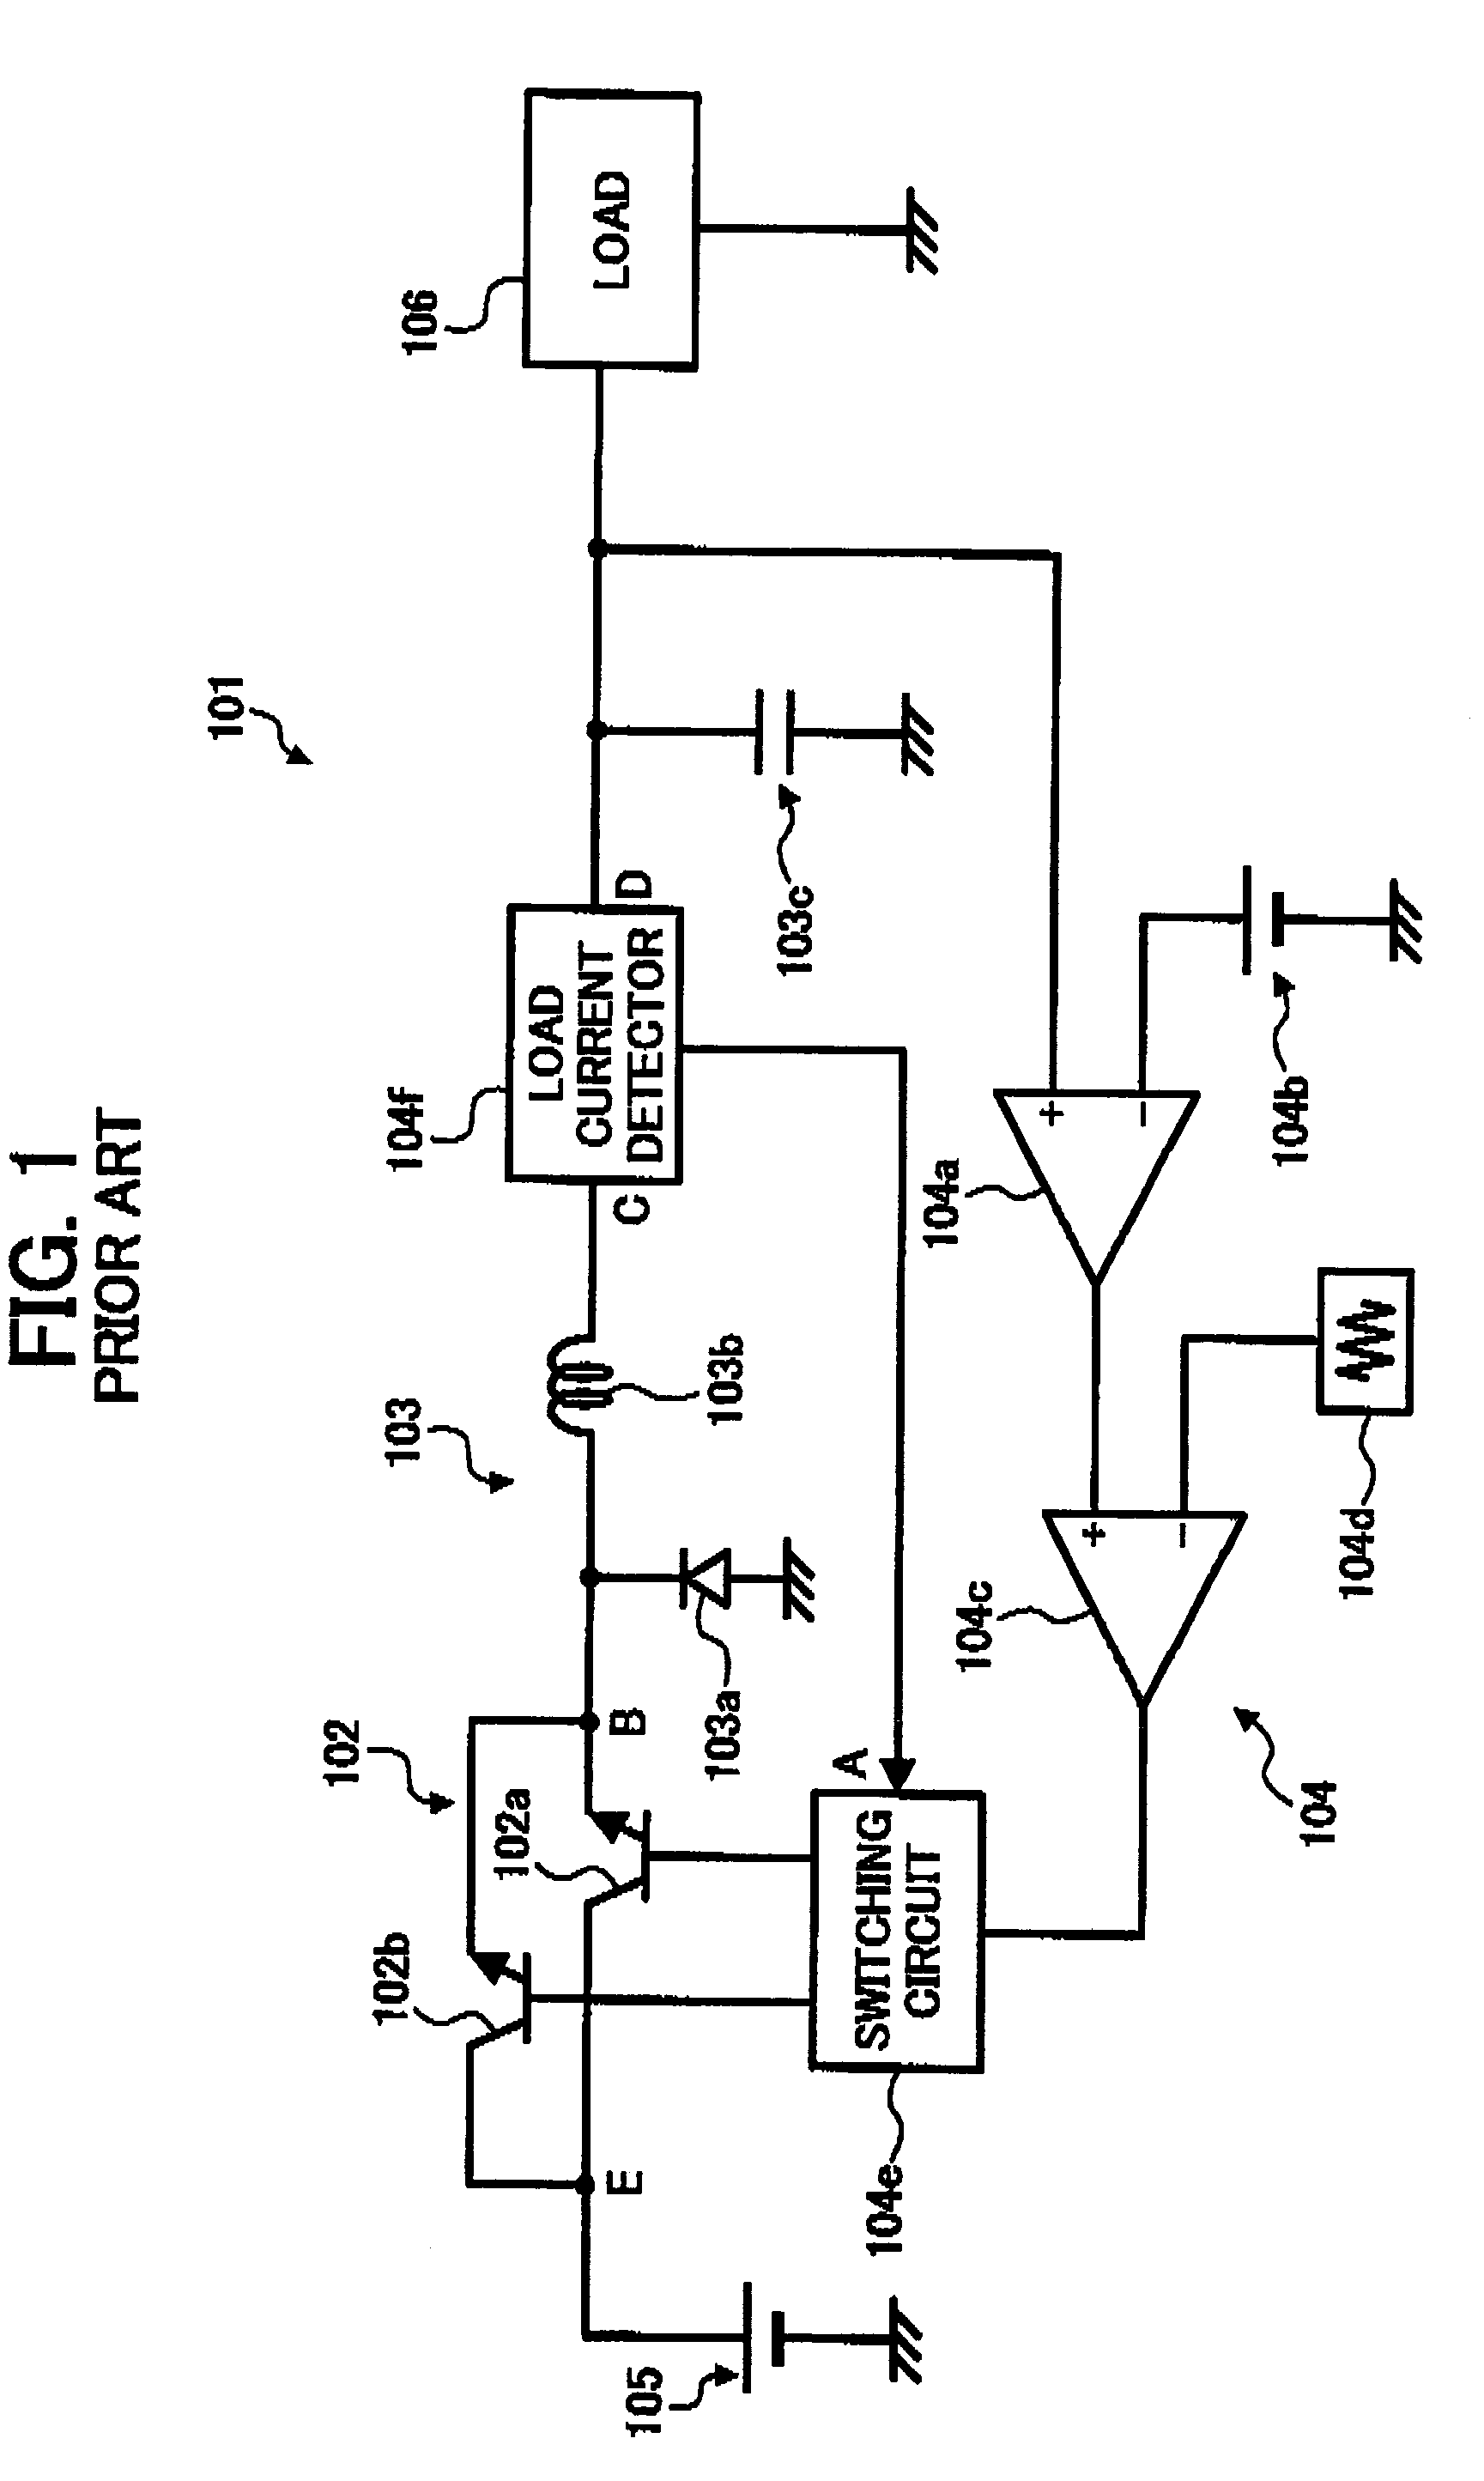 Method and apparatus for power supply controlling capable of effectively controlling switching operations